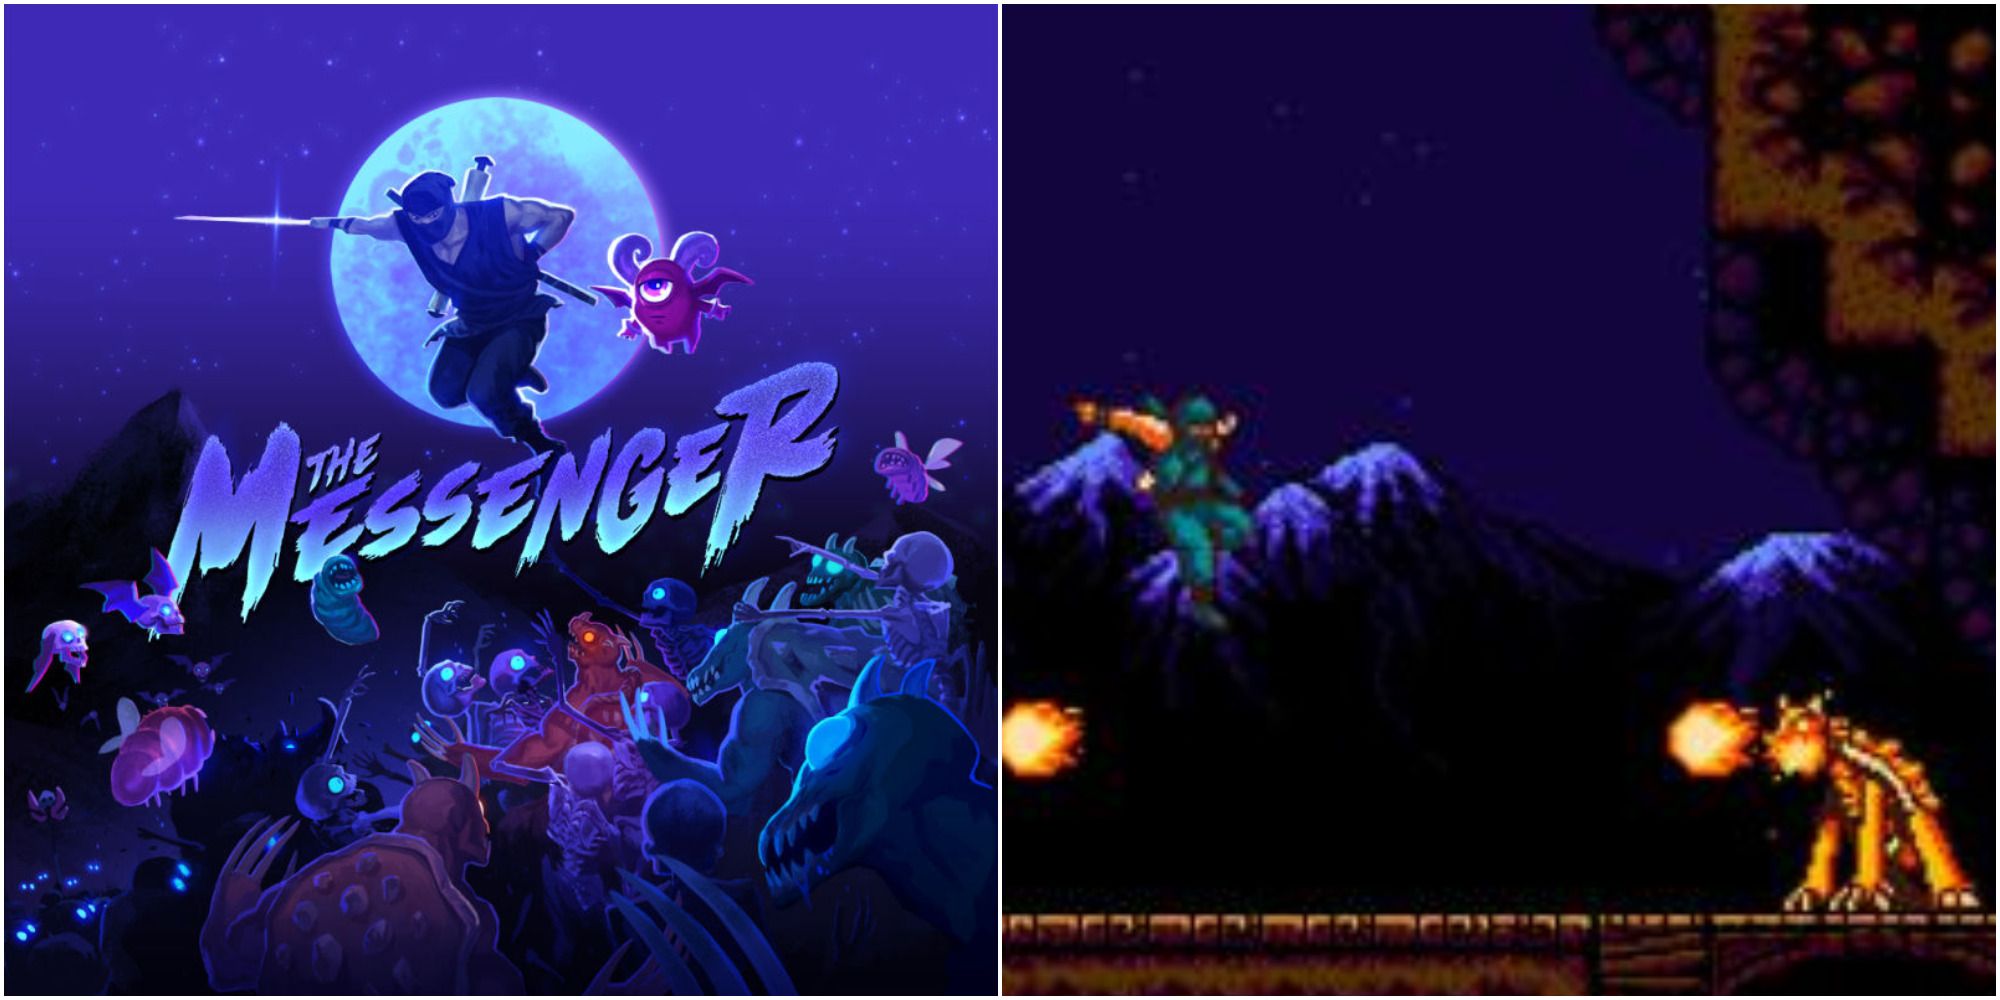 the messenger cover & gameplay